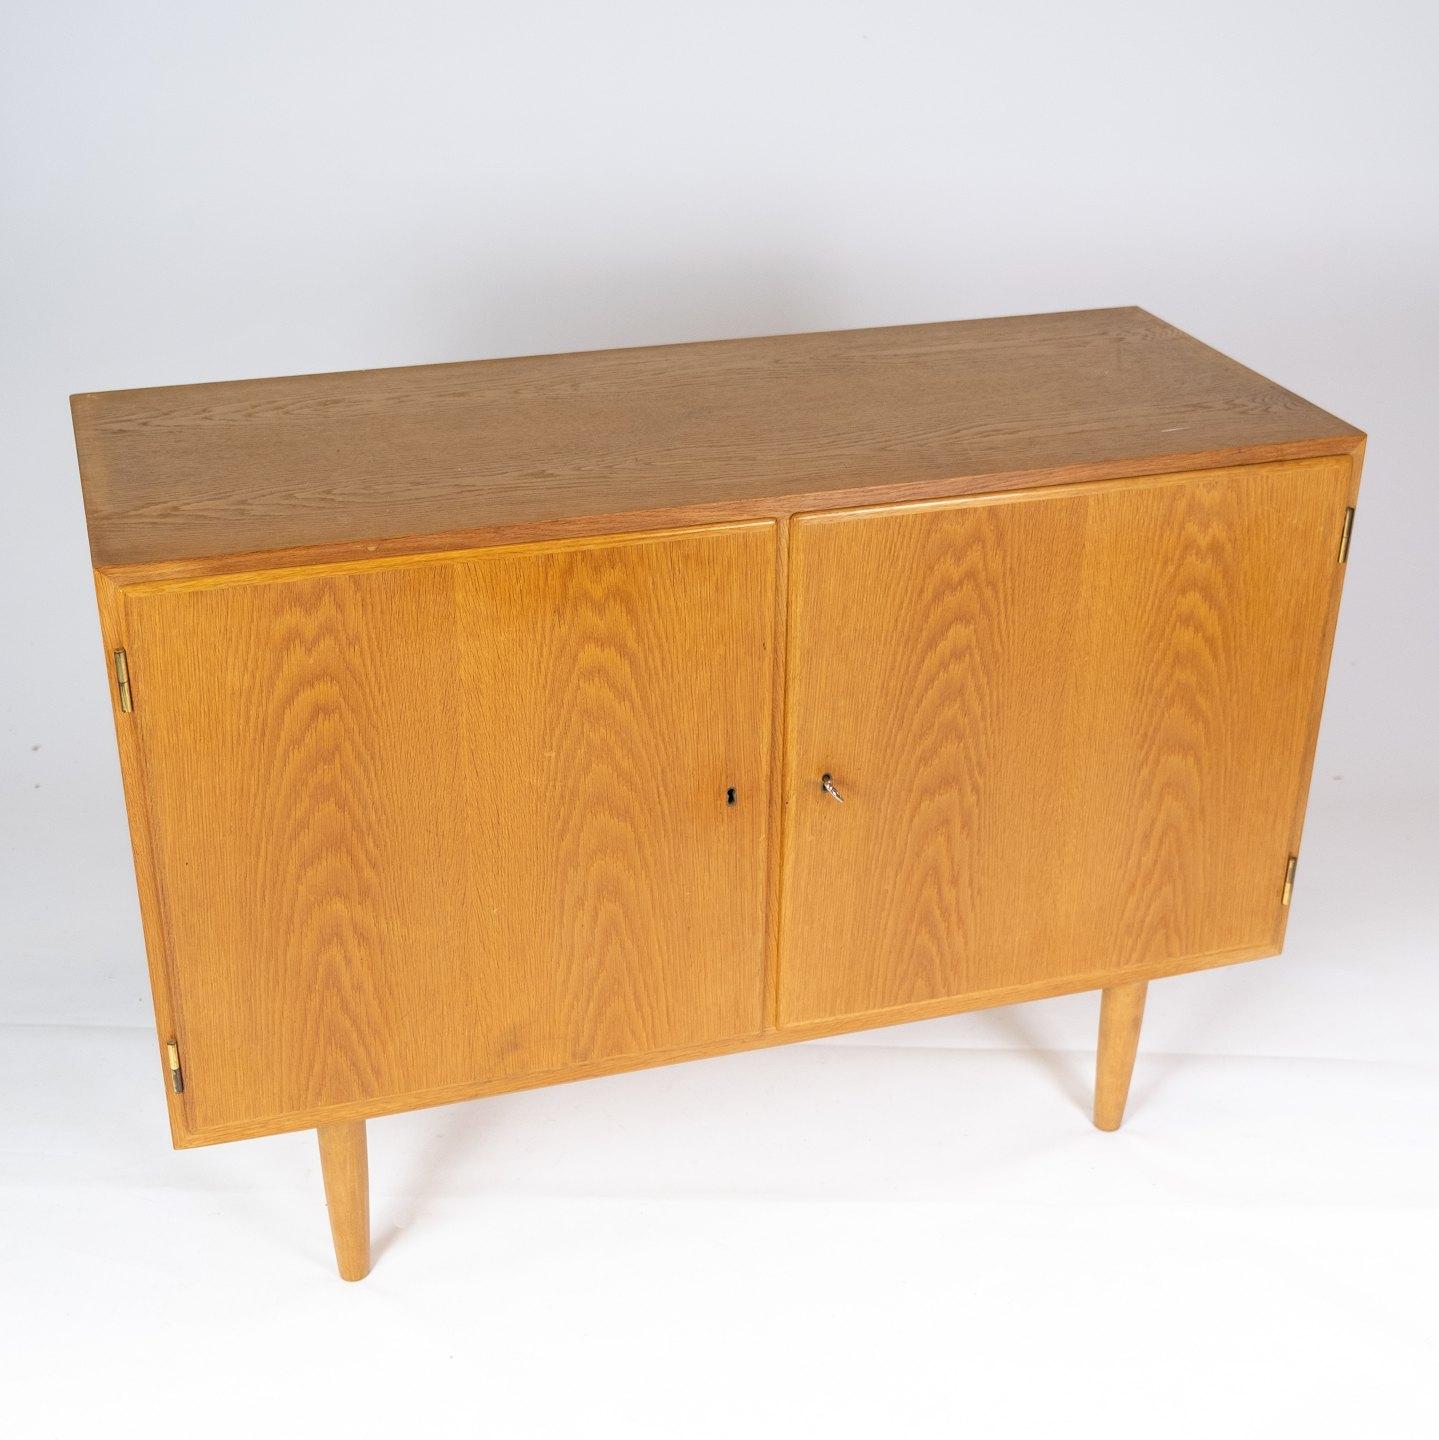 Sideboard in oak designed by Poul Hundevad from the 1960s. The item is in great vintage condition and we have two in stock.
Measures: H 75 cm, W 108 cm and D 43 cm.